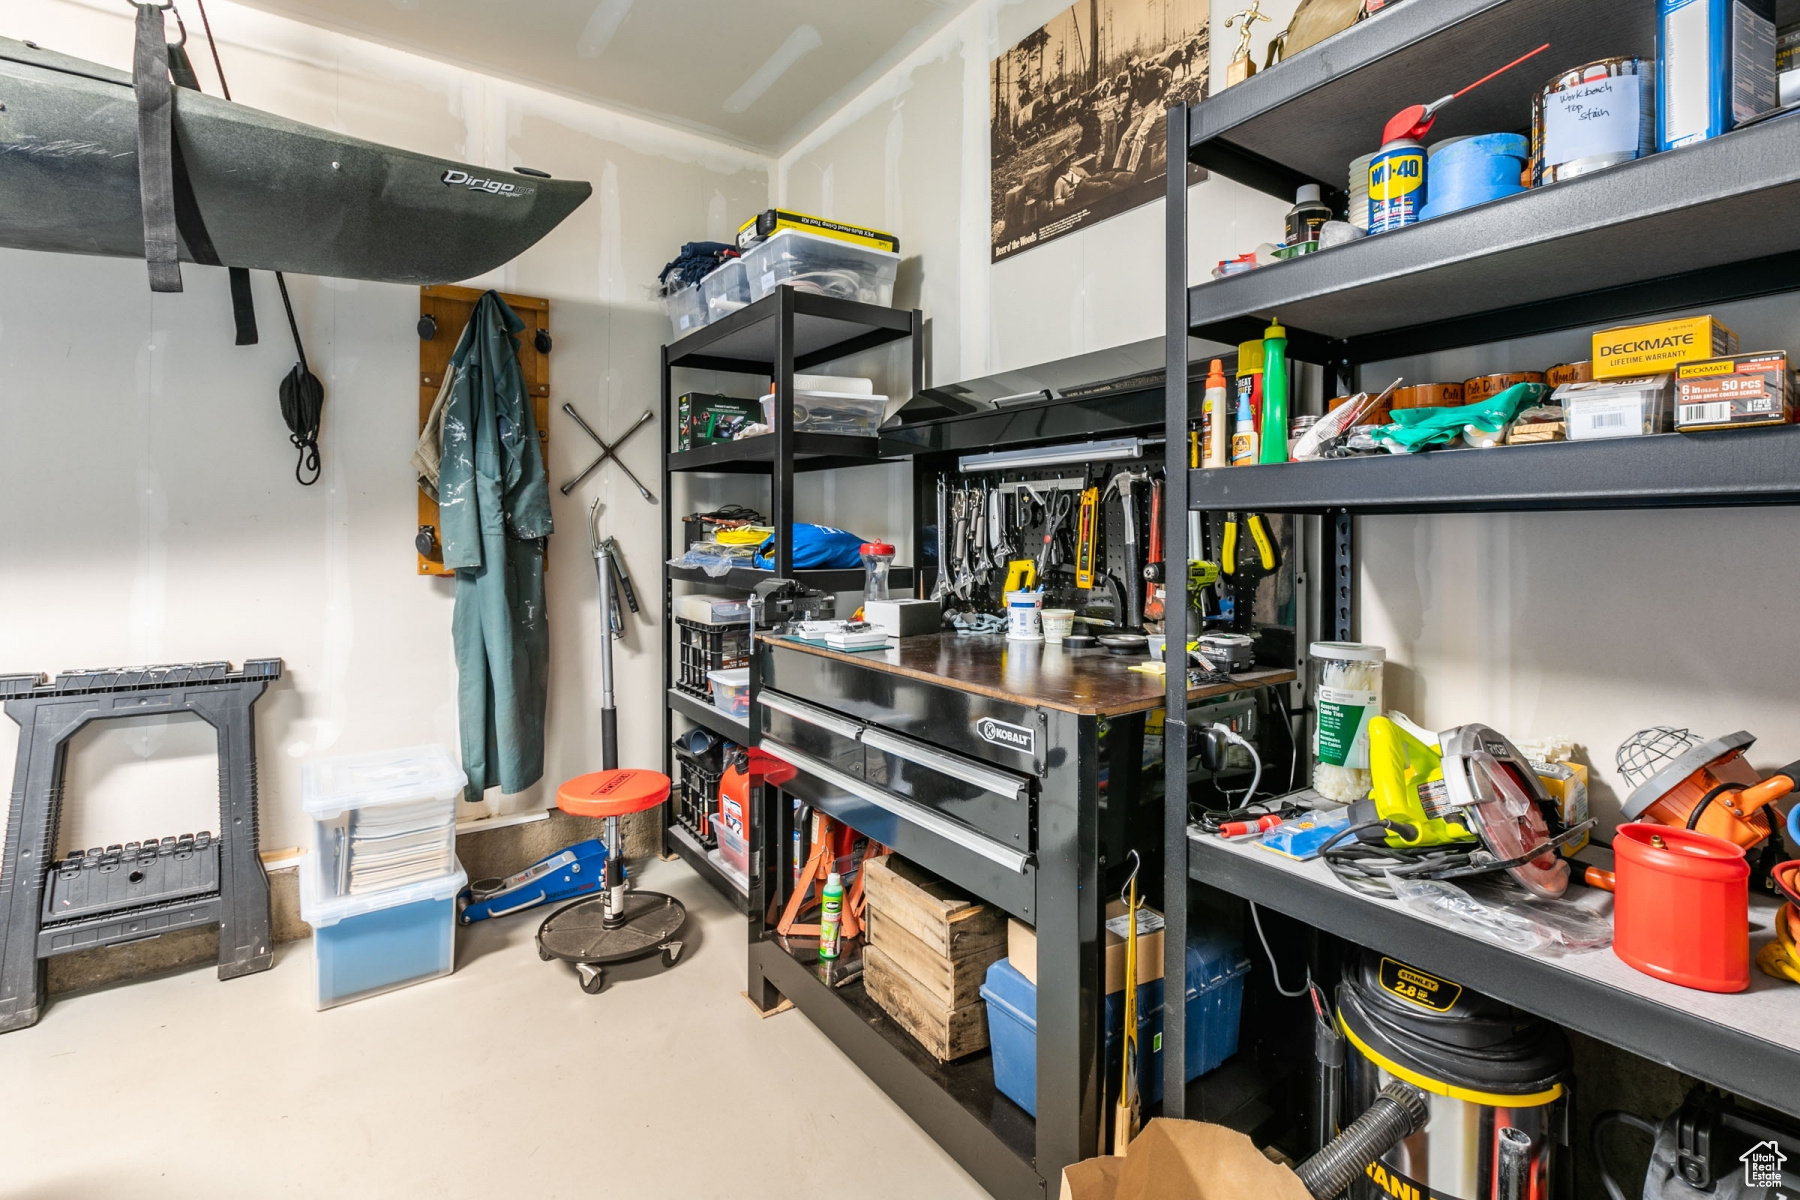 Lots of space in garage that gives space for whatever you need!